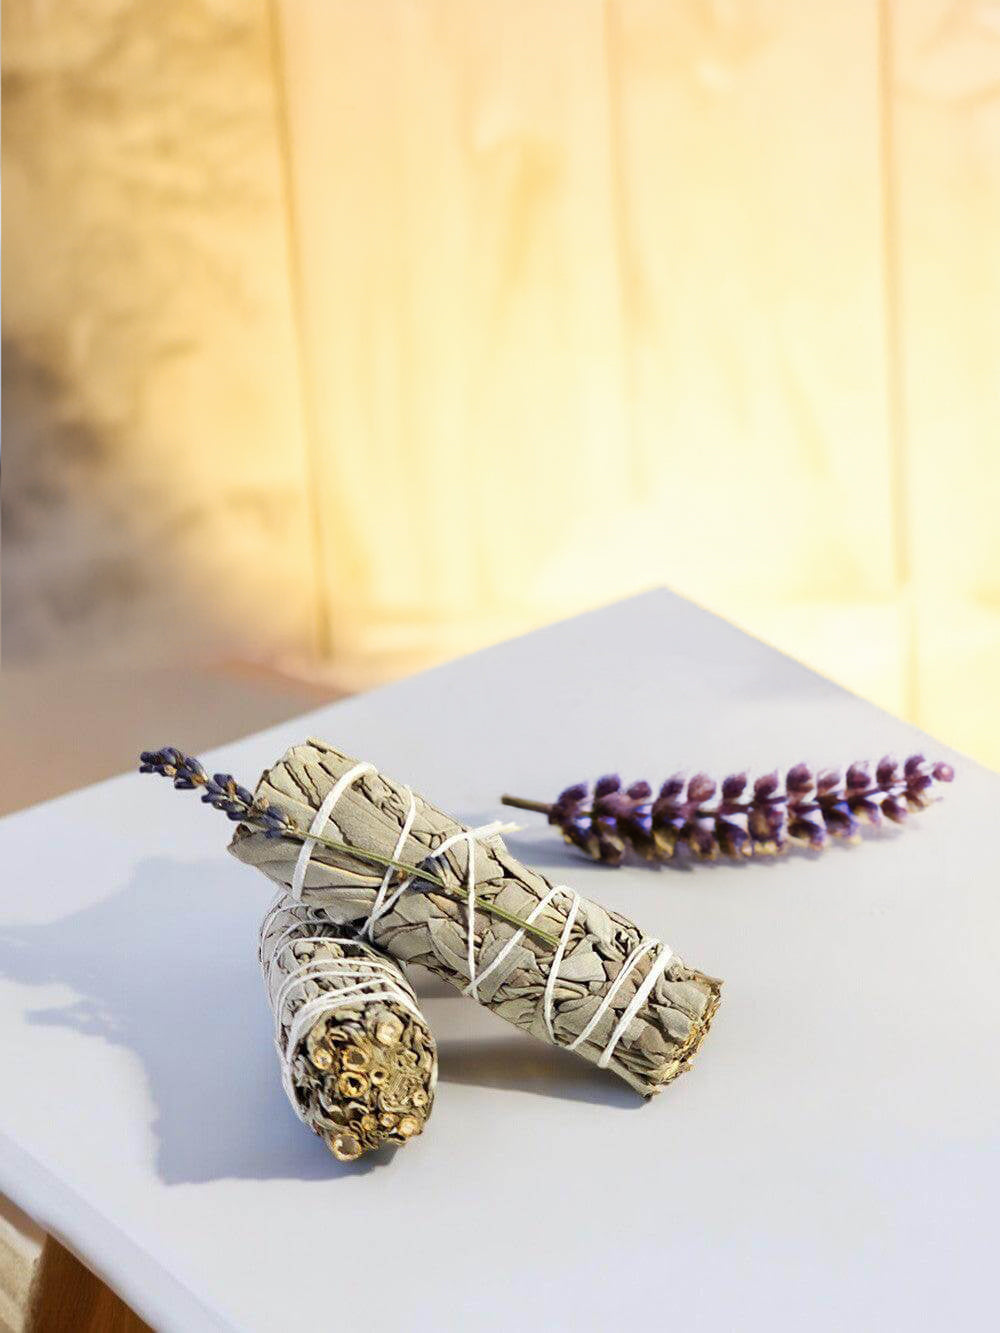 Pure Cleanse Sage Stick - A natural white sage smudge for cleansing spaces